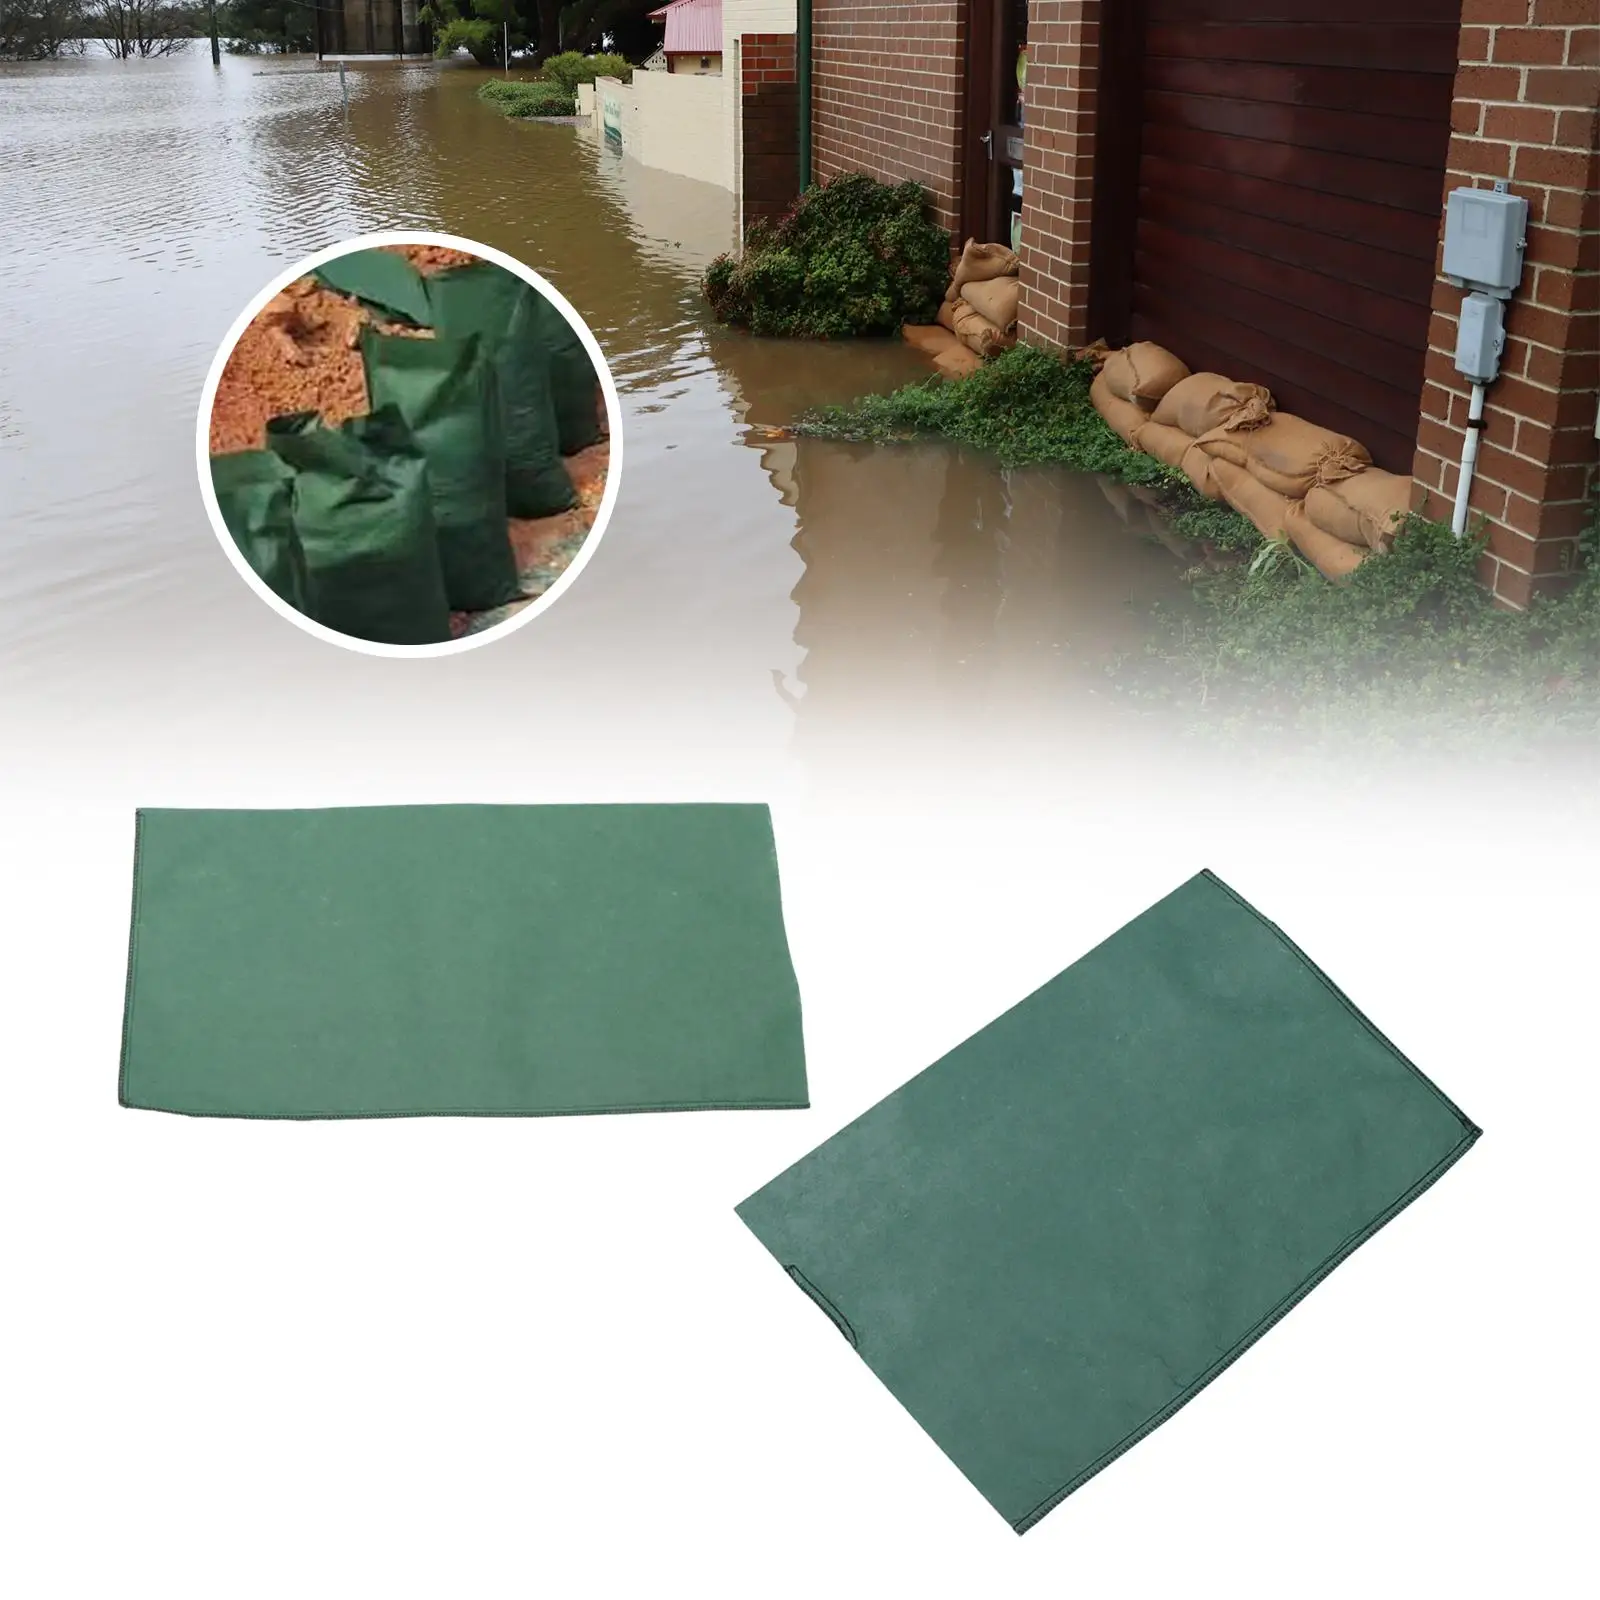 Water Barriers for Rain Water Control Doors and Windows Empty Sandless Sand Bags